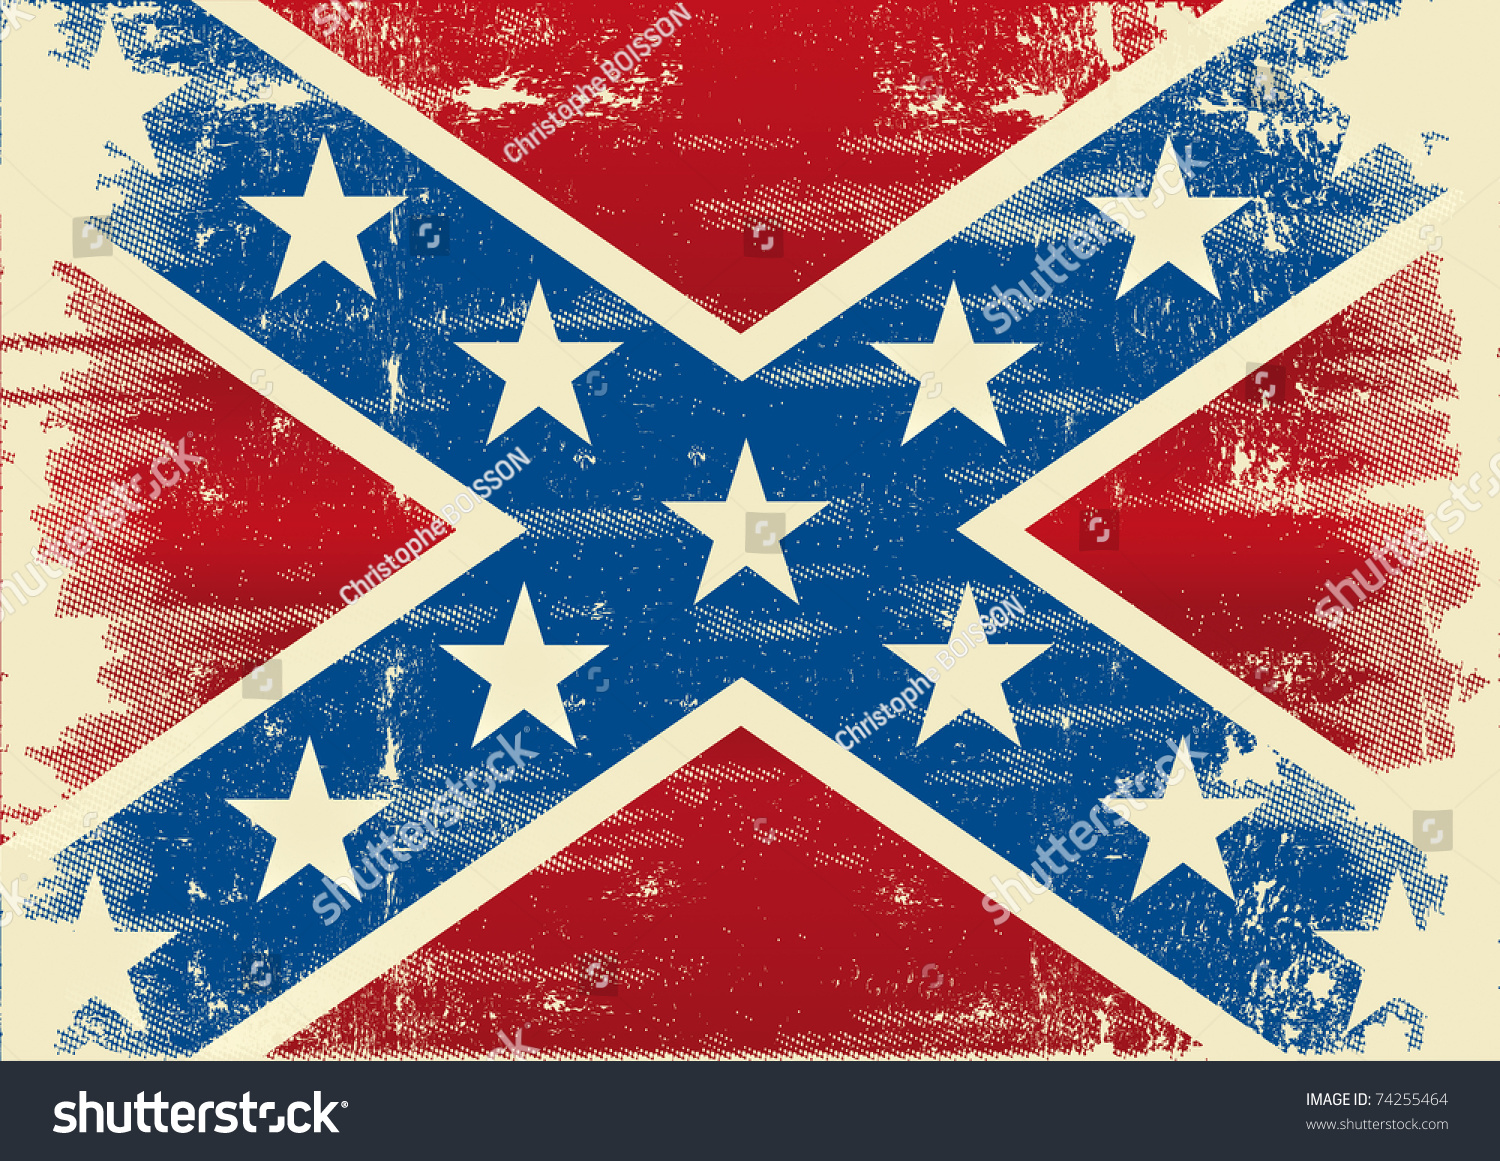 Confederate Flag Background Poster Stock Vector 74255464 - Shutterstock